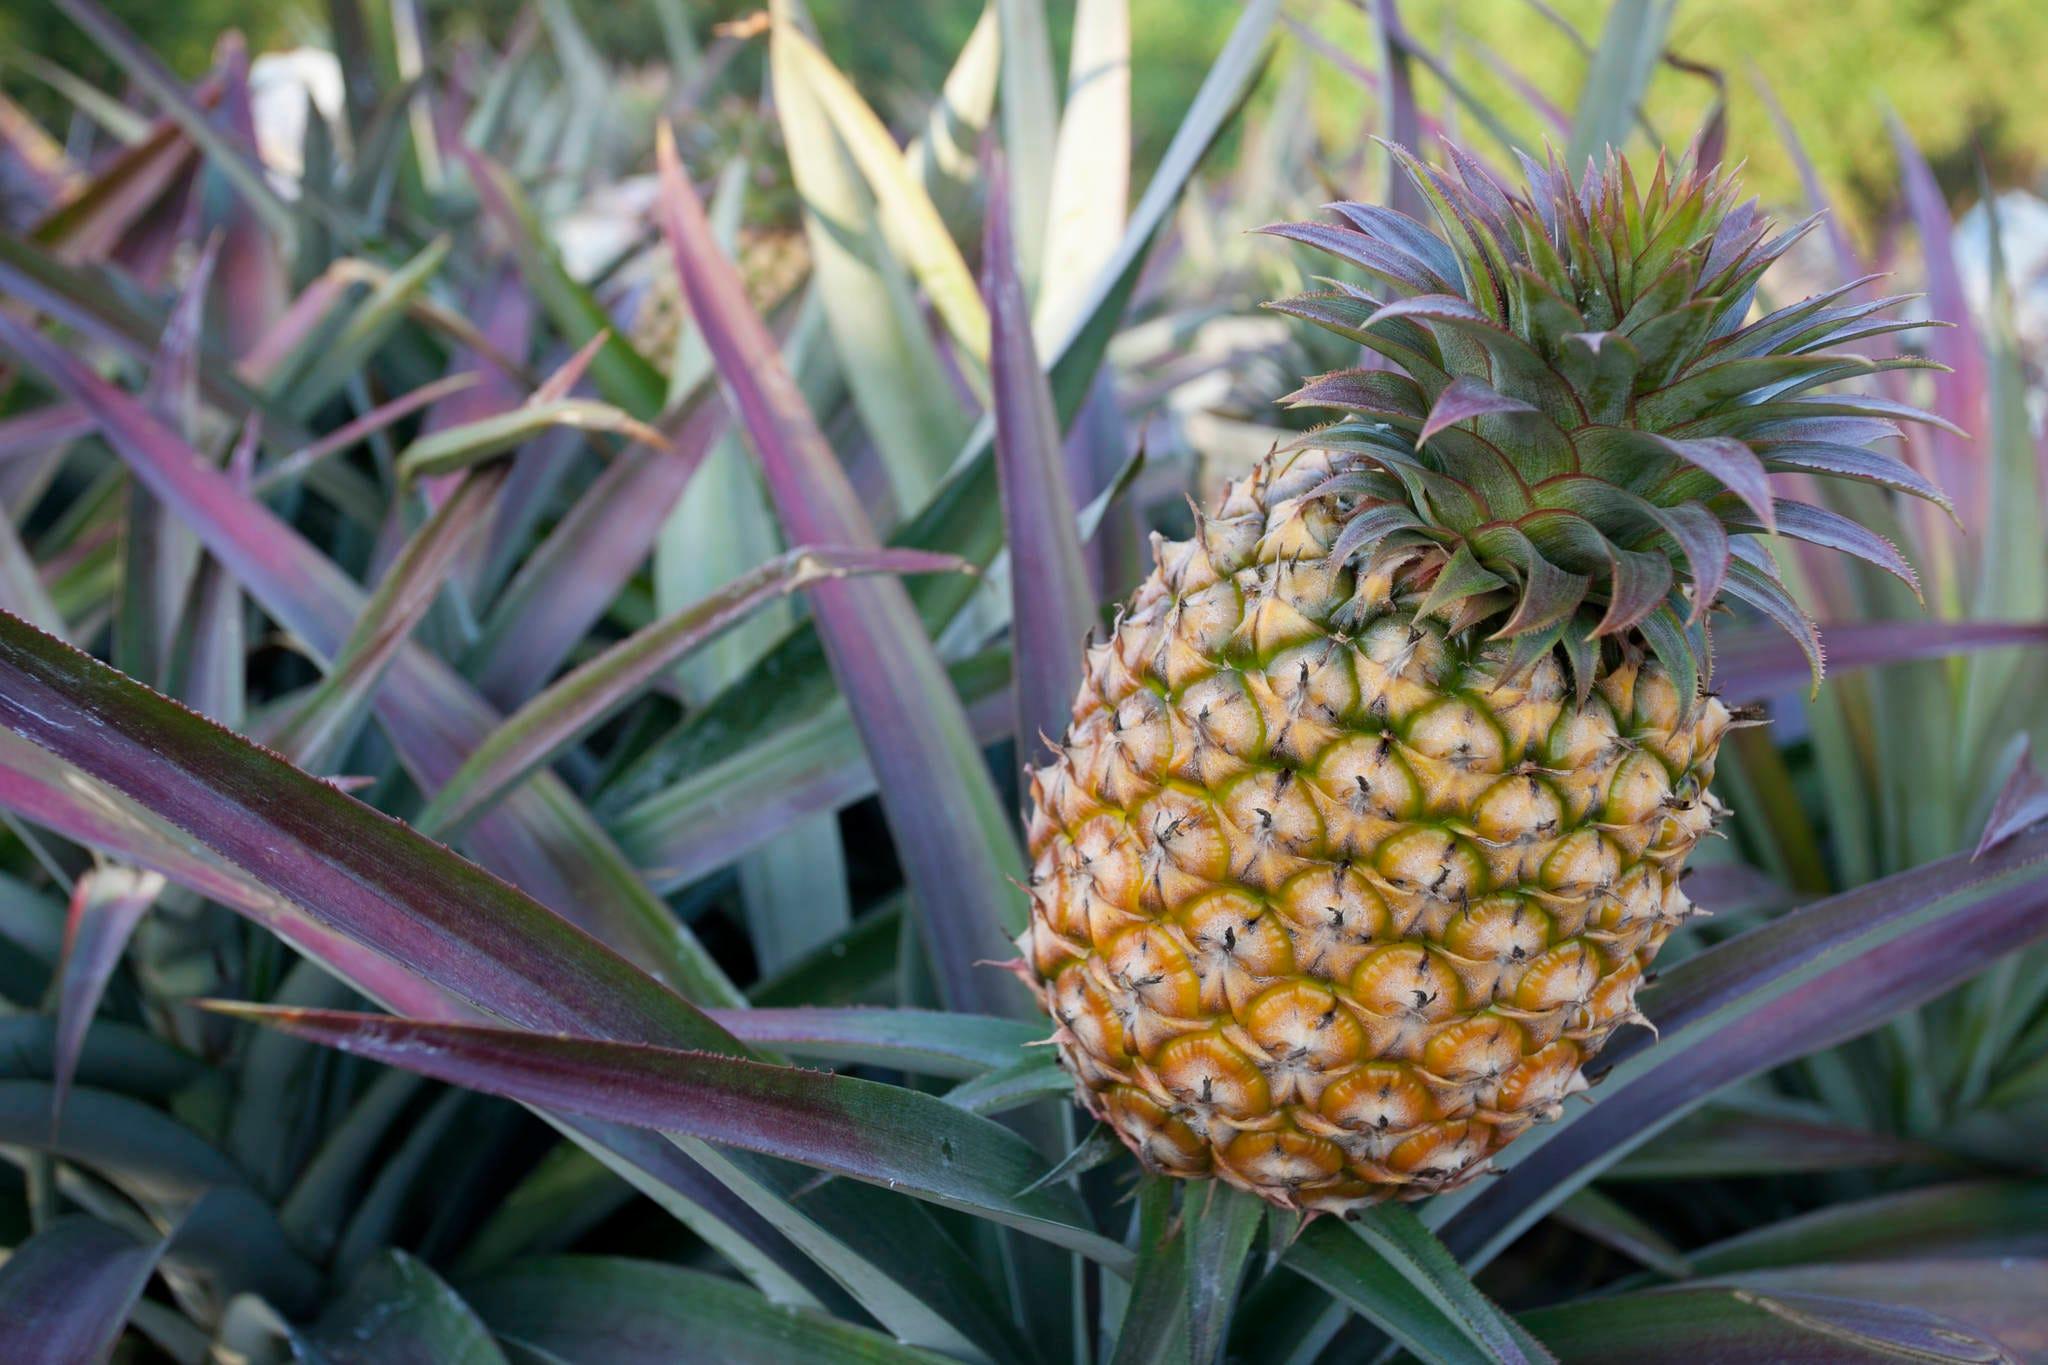 It’s easy to grow pineapple at home; the tricky part is knowing when it’s ready for harvest. (Thinkstock photo)